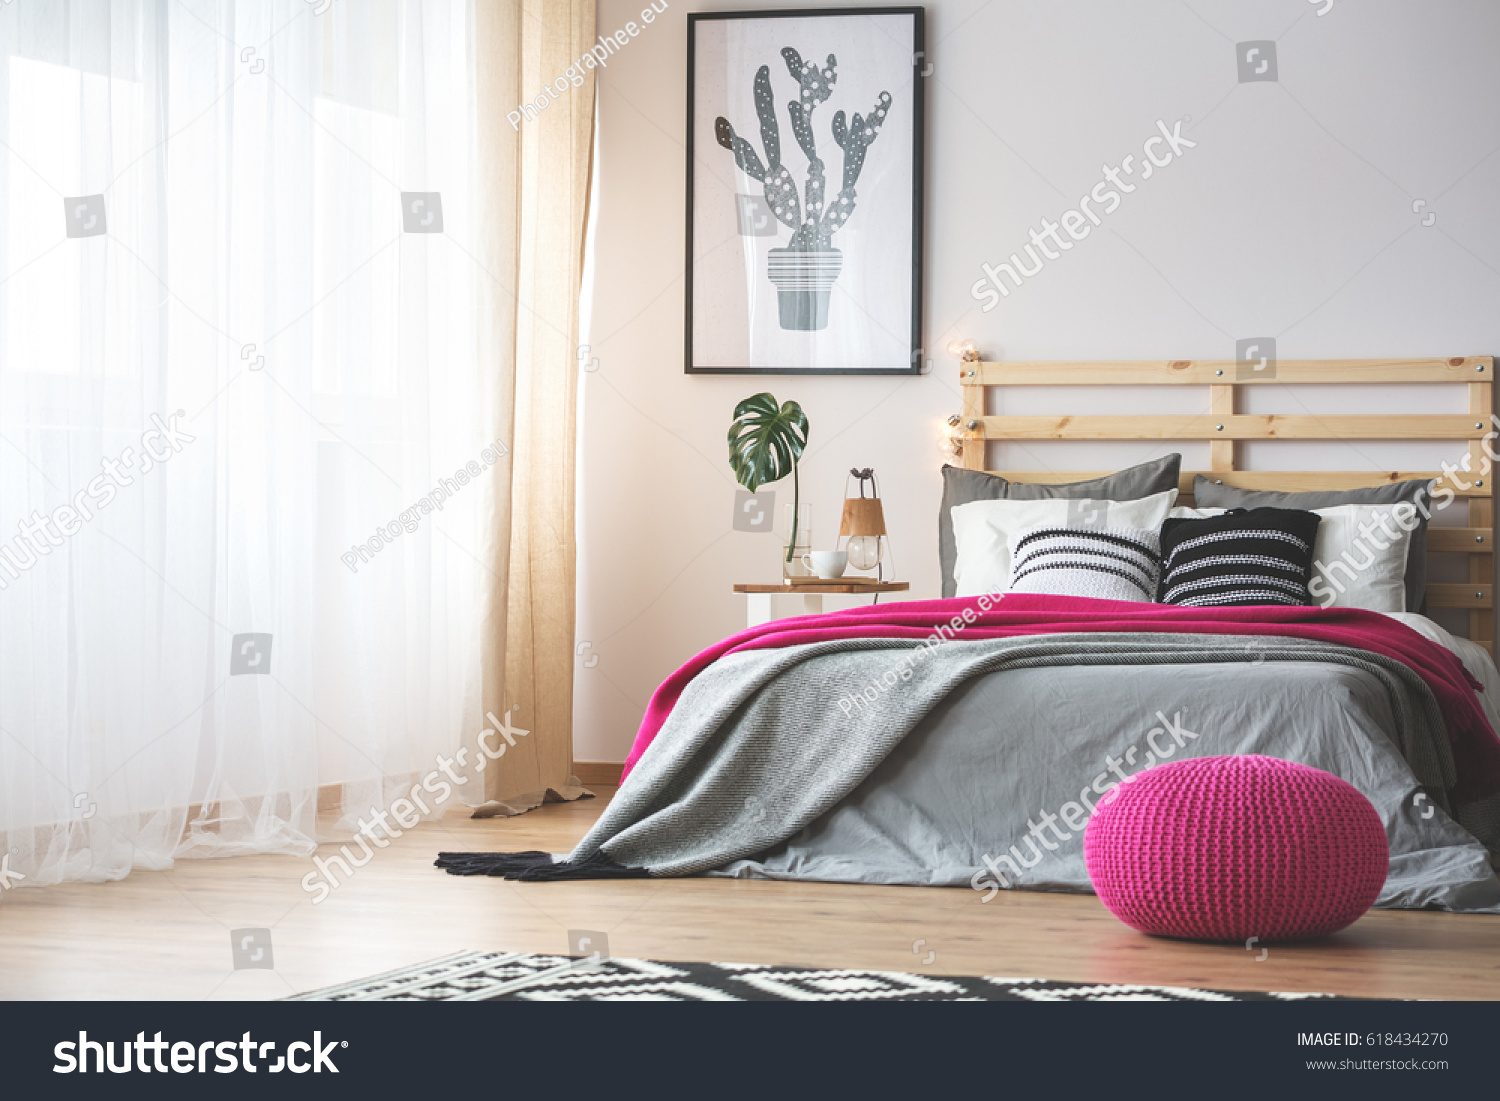 King-size bed in bright bedroom with pink accessories #618434270